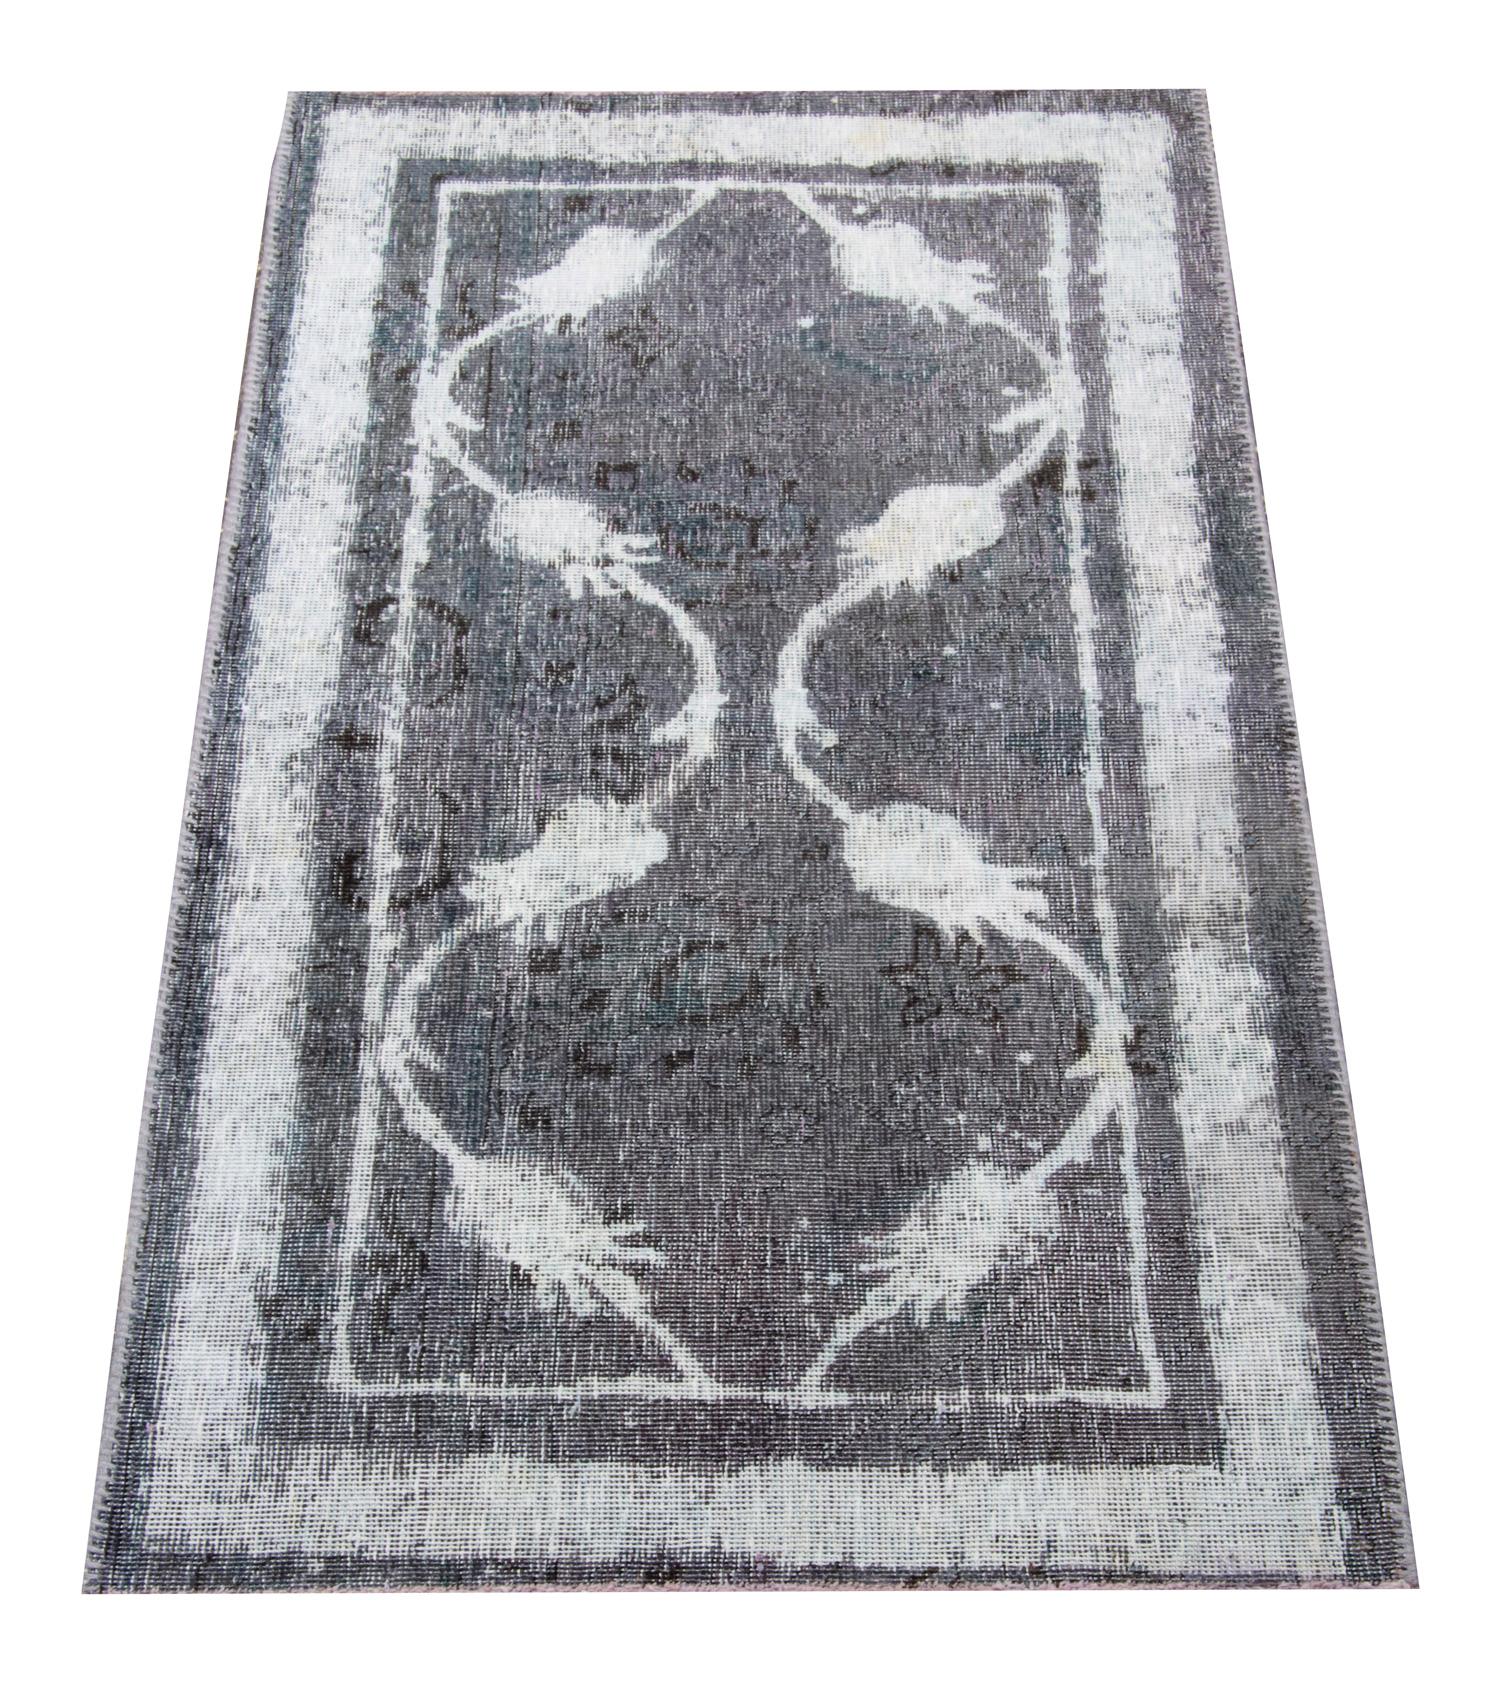 Reloaded overdyed and repainted floral style oriental rug is one of the best choices as Home decor objects and this brown rug has been distressed and over-dyed and repainted to achieve modern rugs and industrial design in a singular coffee brown rug